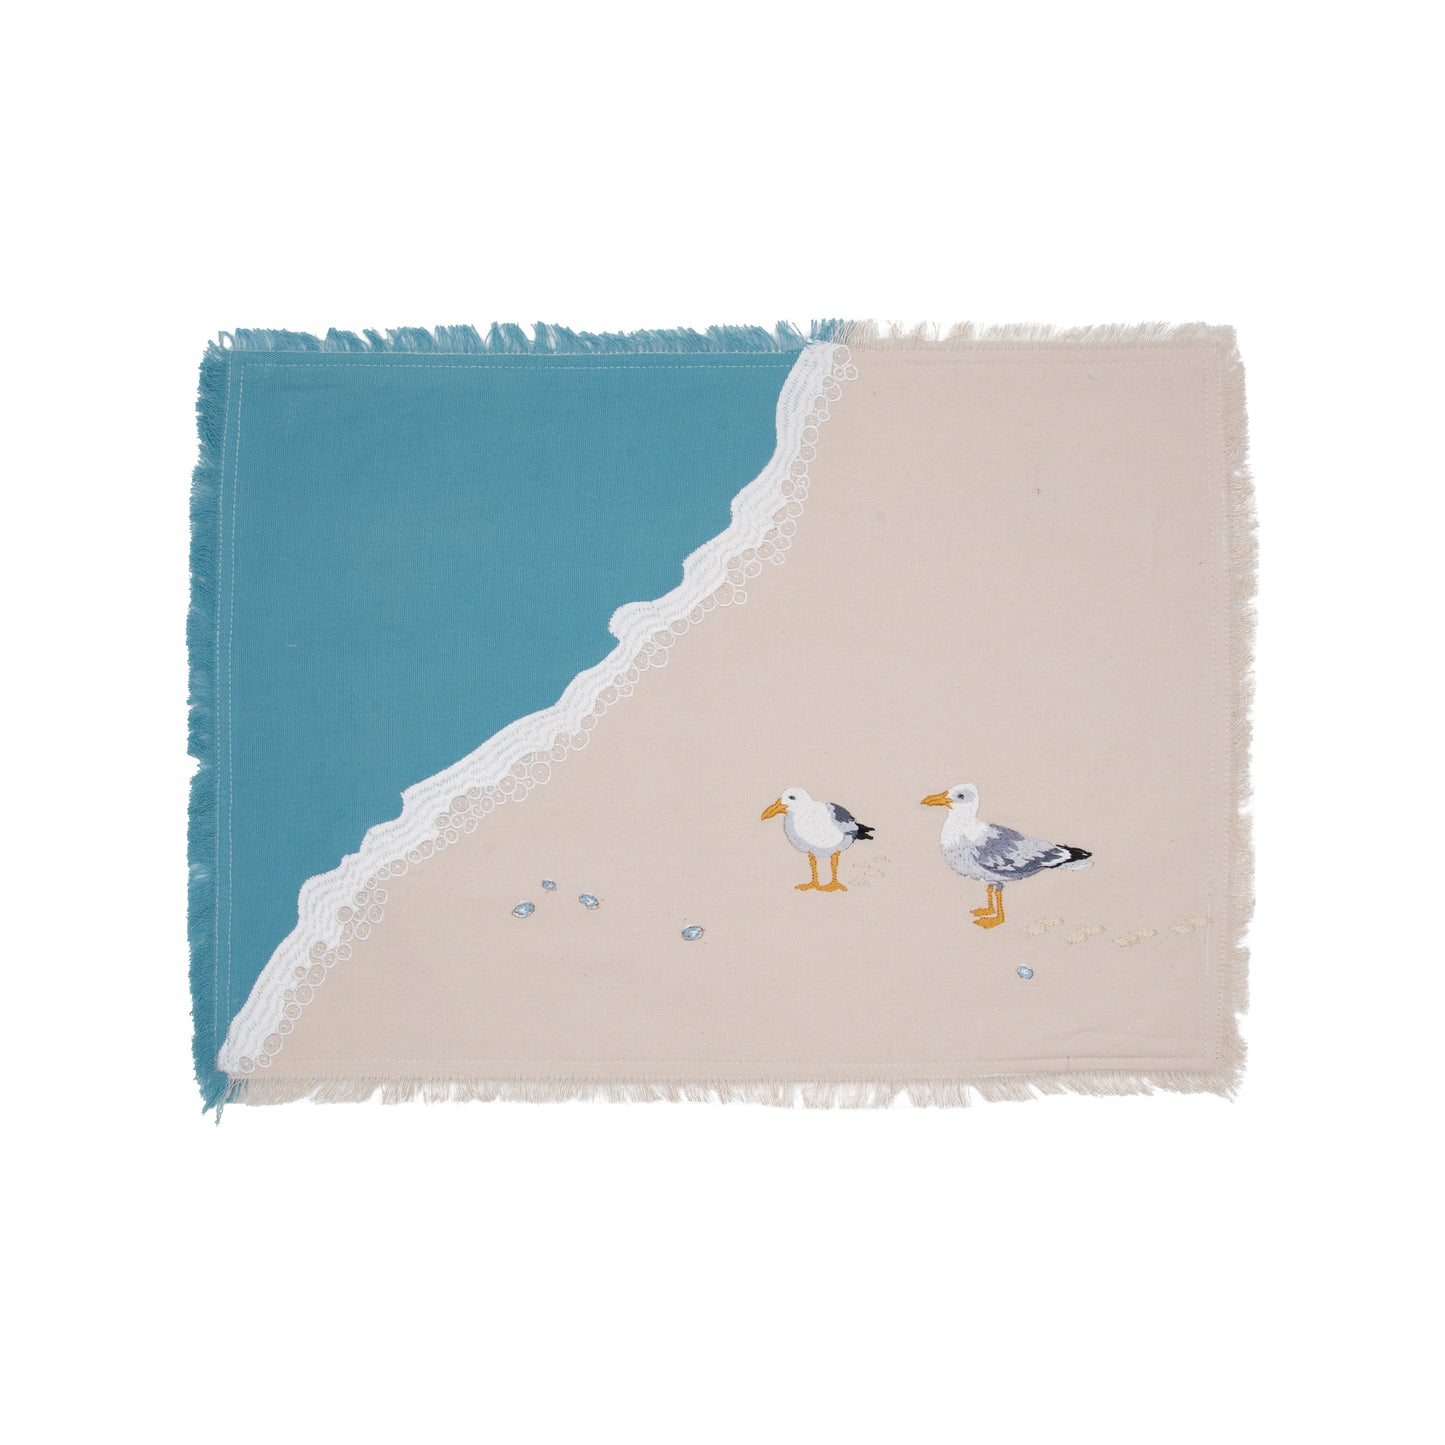 Two sea gulls embroidered on a cotton fringed placemat featuring blue waves on sand.